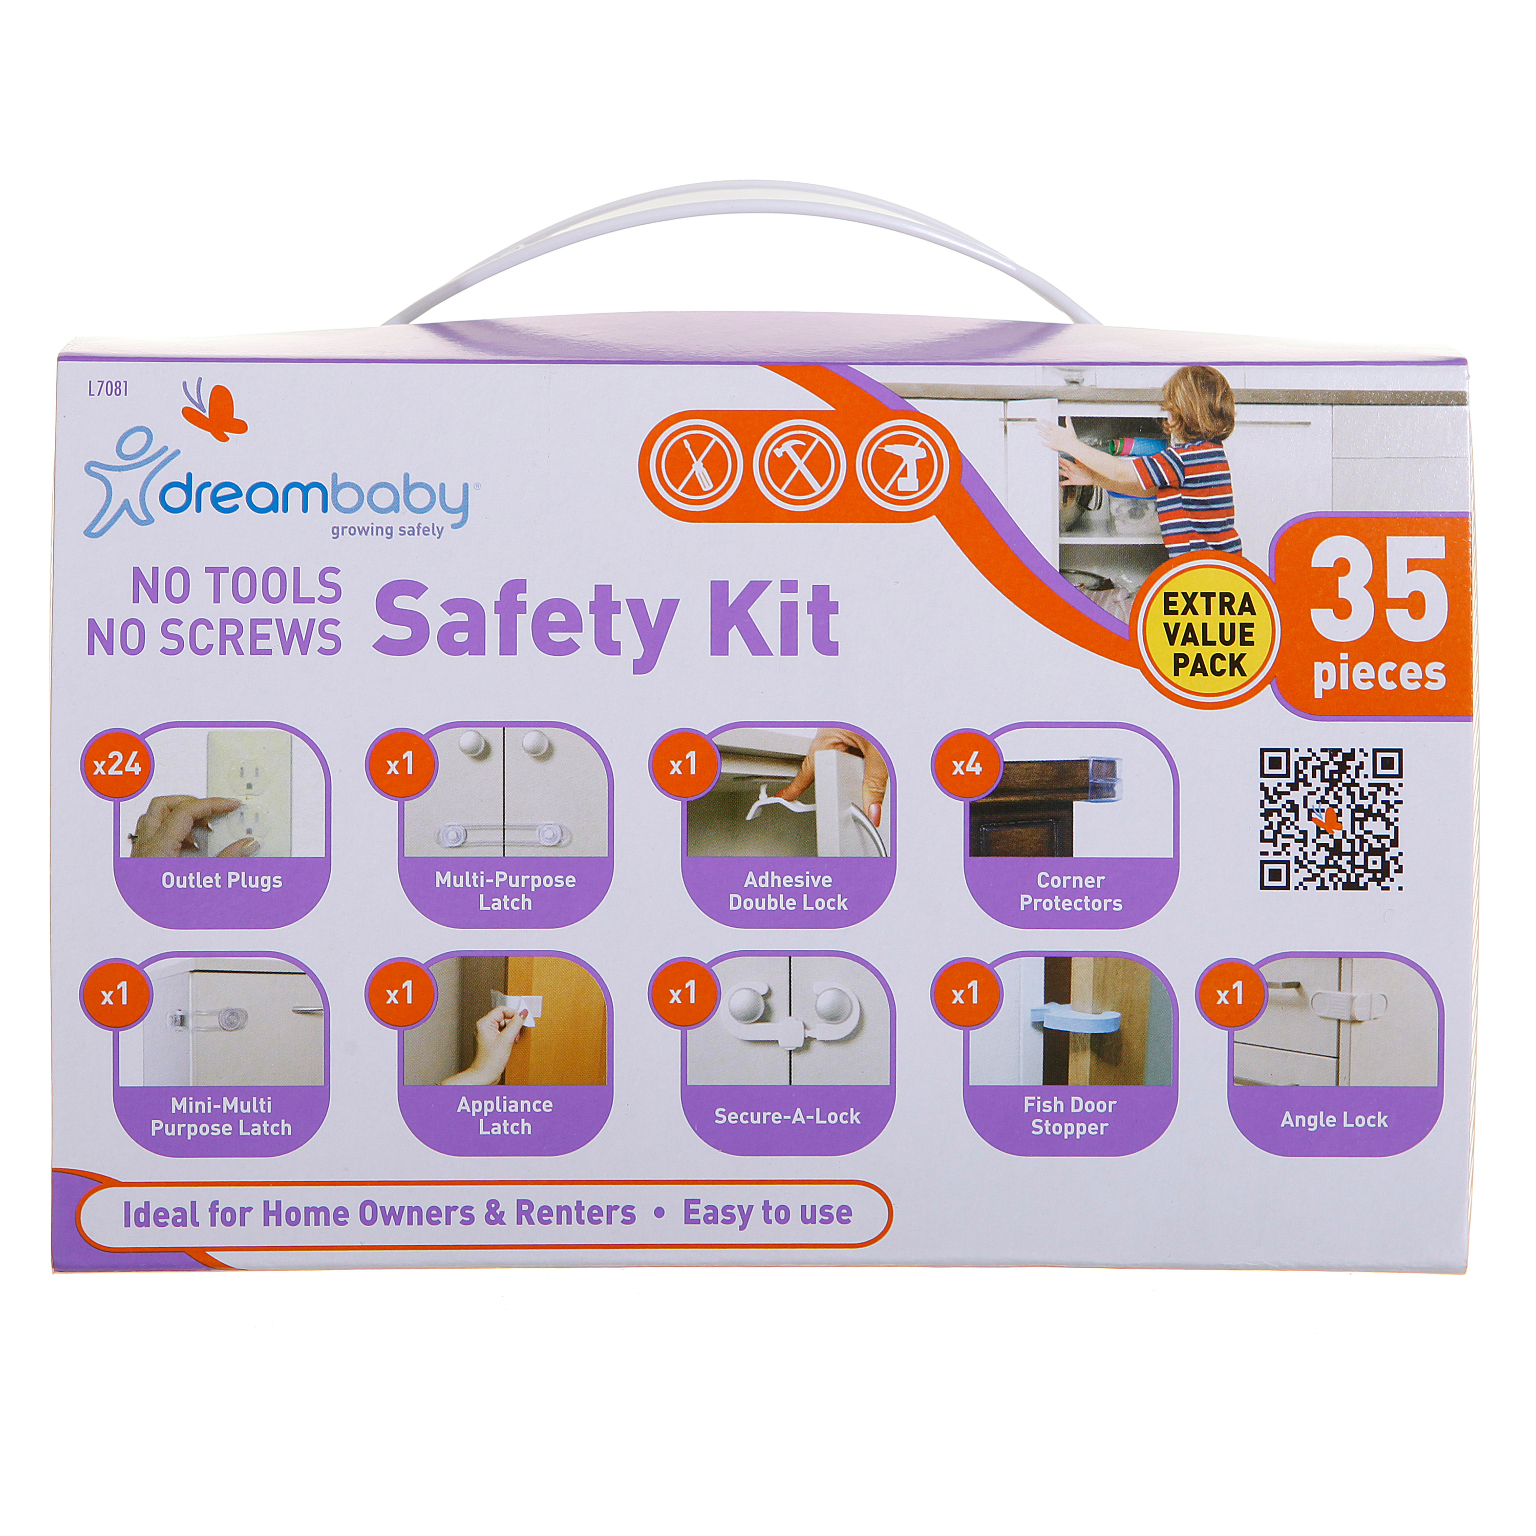 Wholesale Baby-Proofing Kits - 35 Pieces, Adhesive